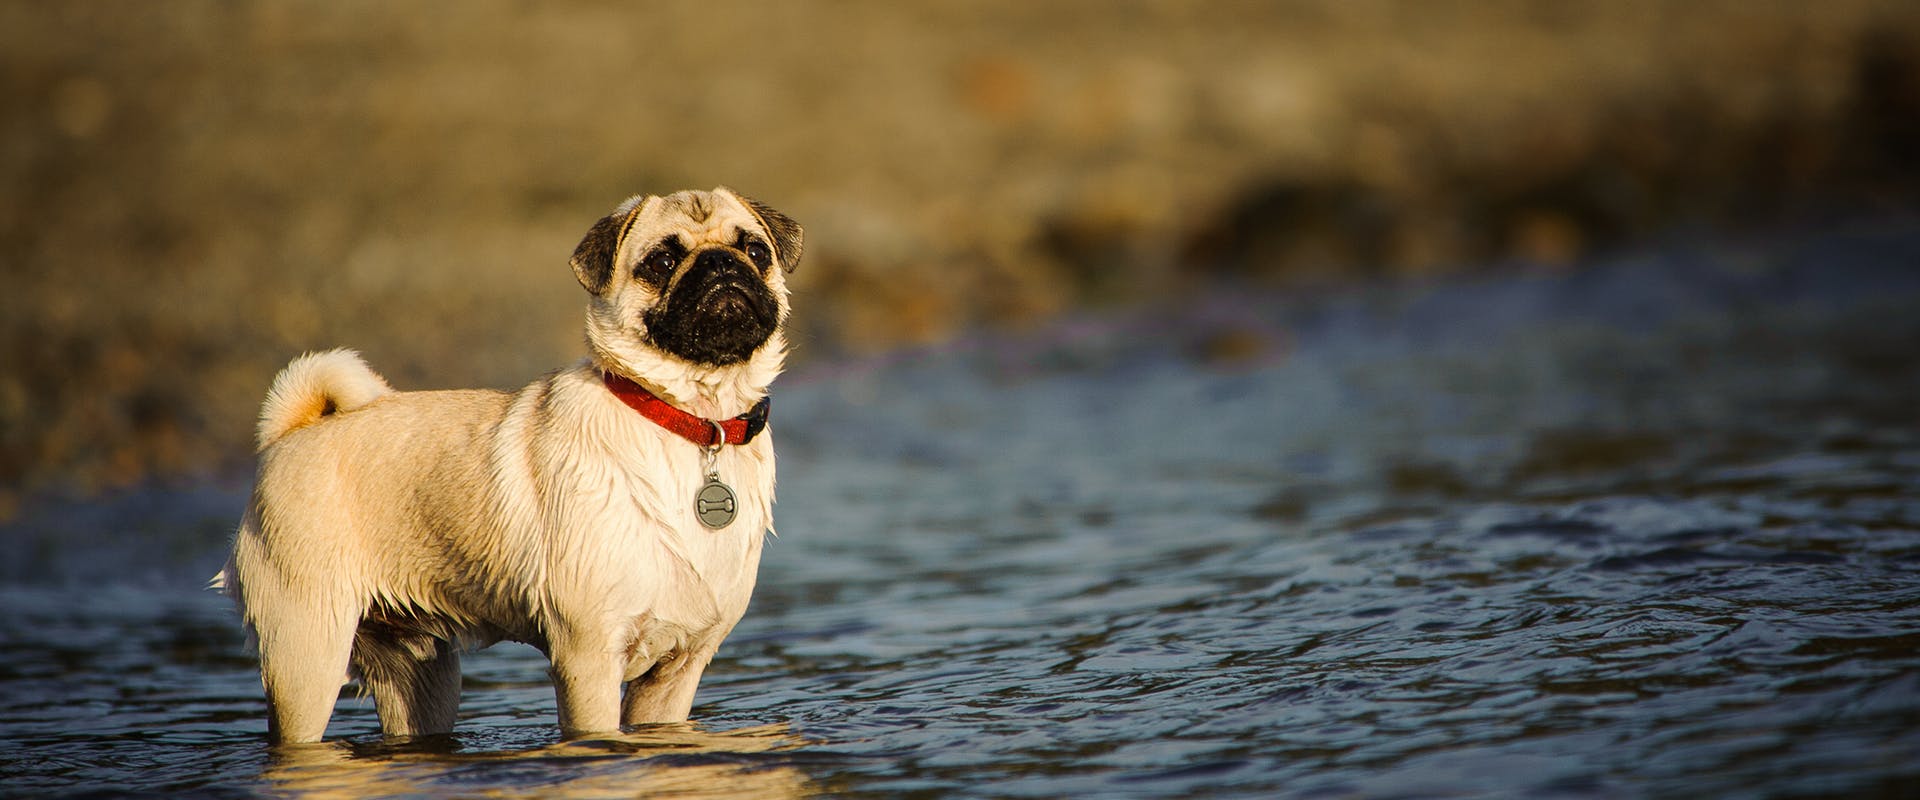 A pug standing in a river